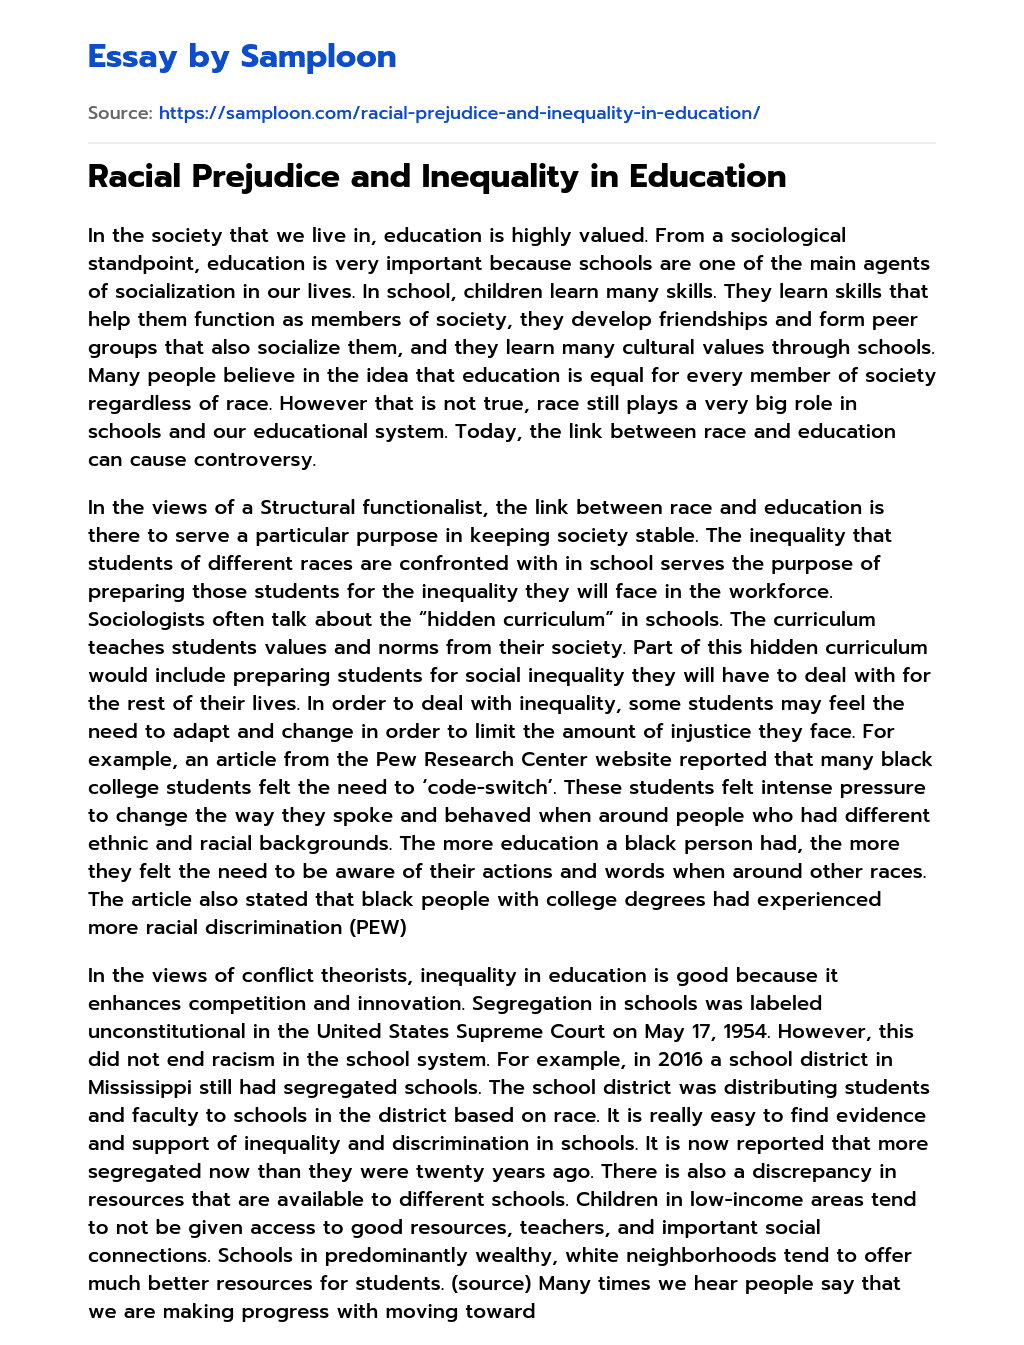 Racial Prejudice and Inequality in Education essay